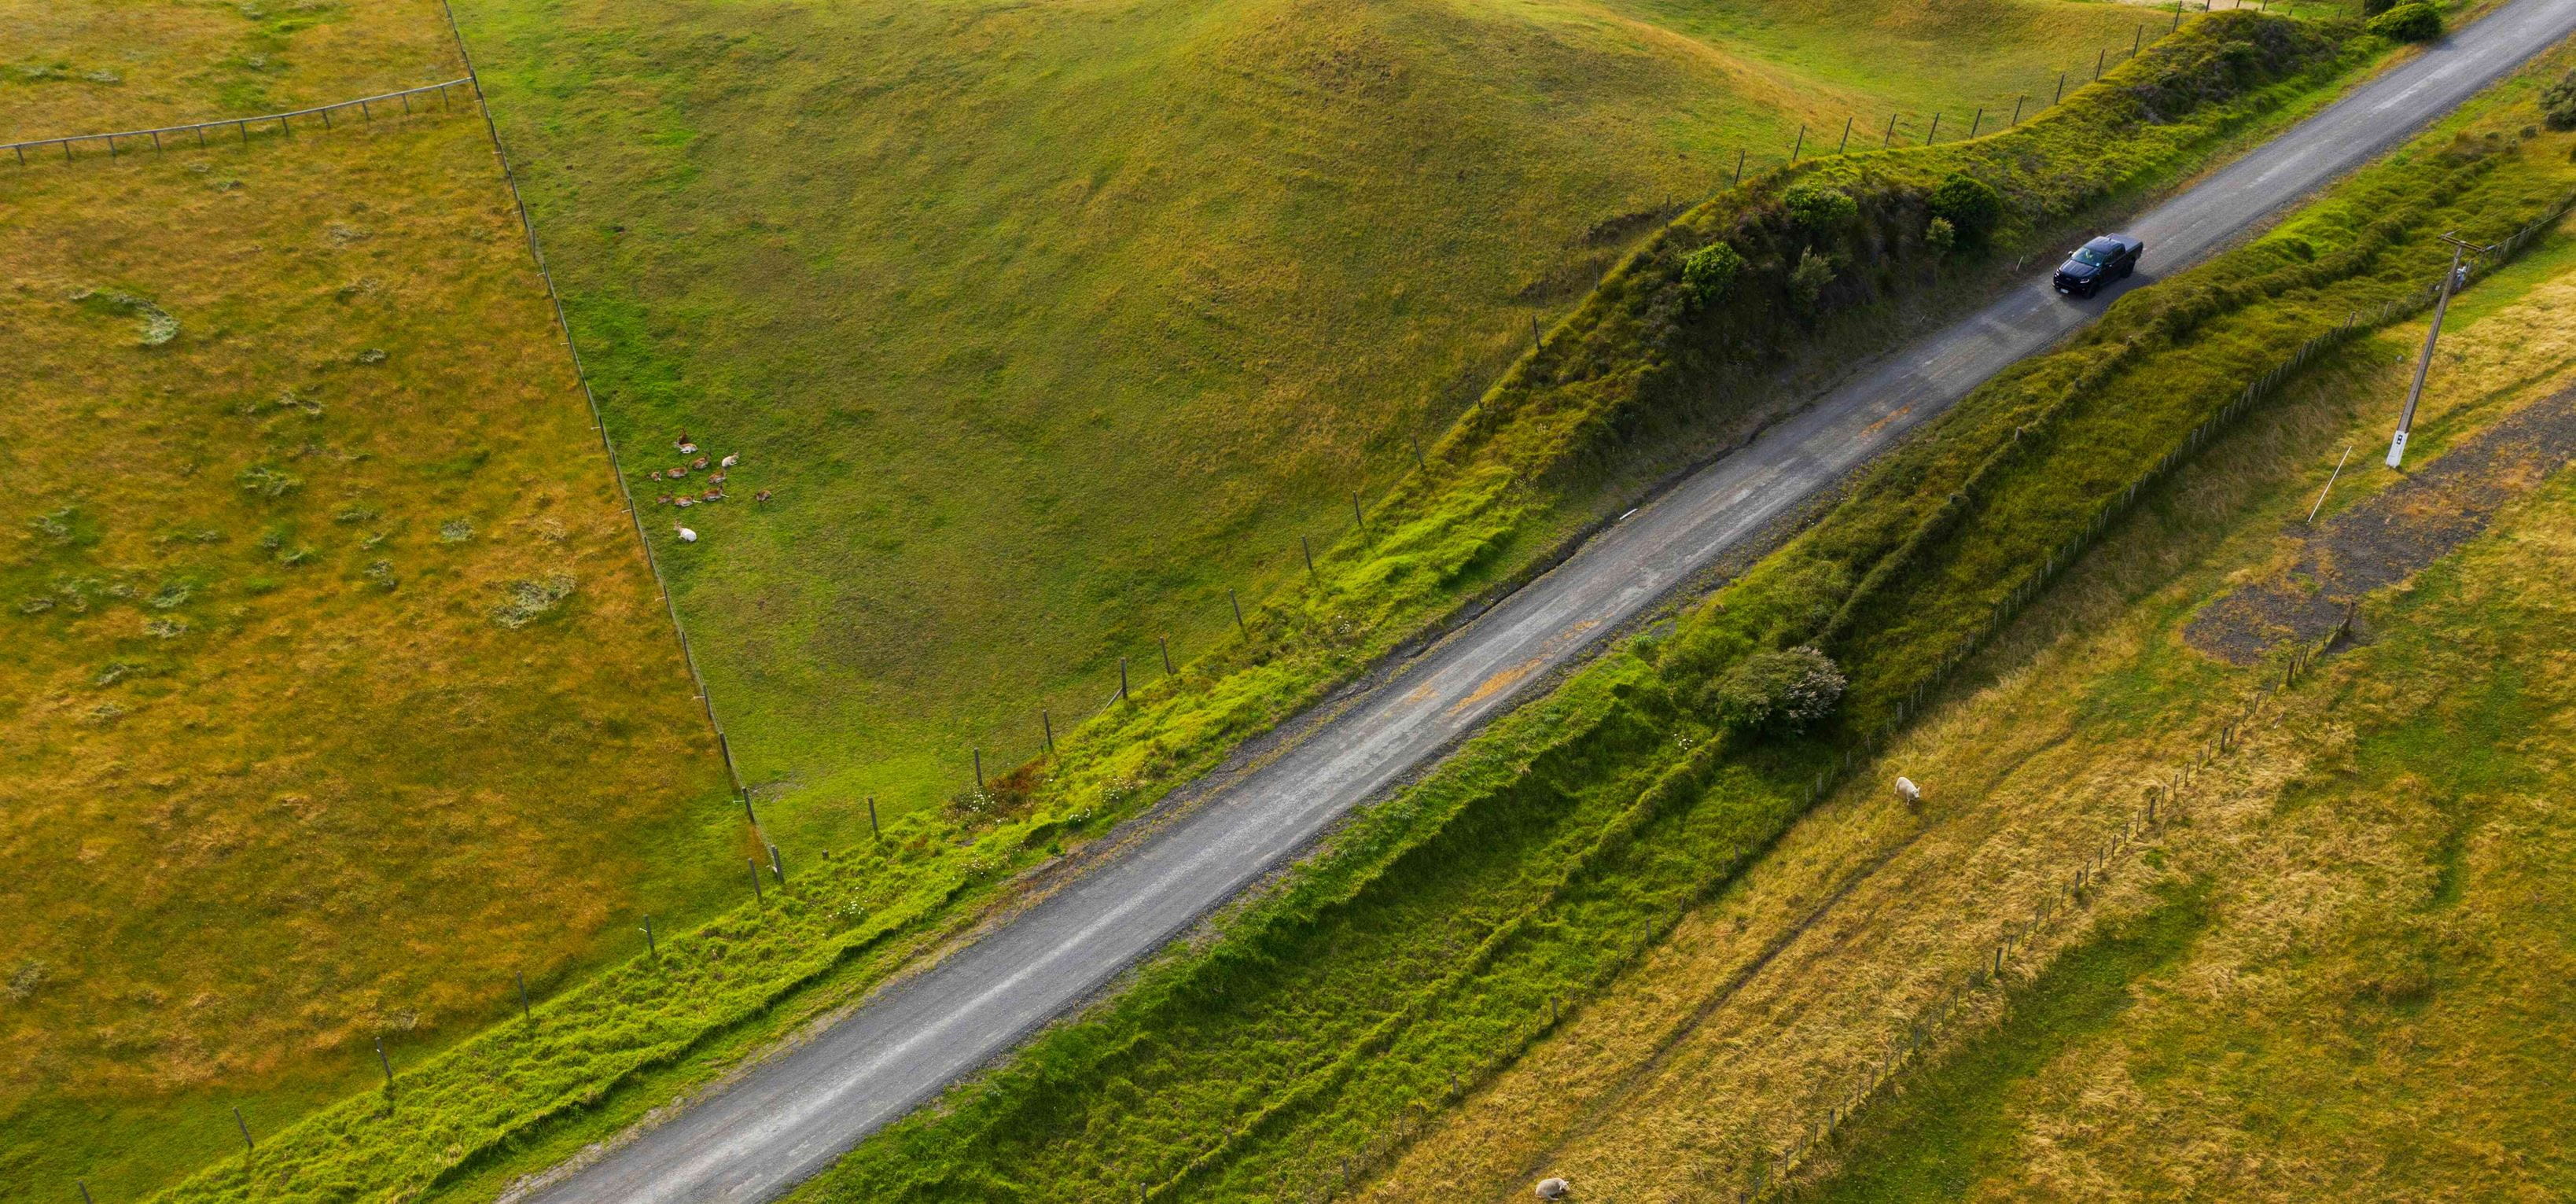 Aerial shot of a black car on a country road surrounded by green fields